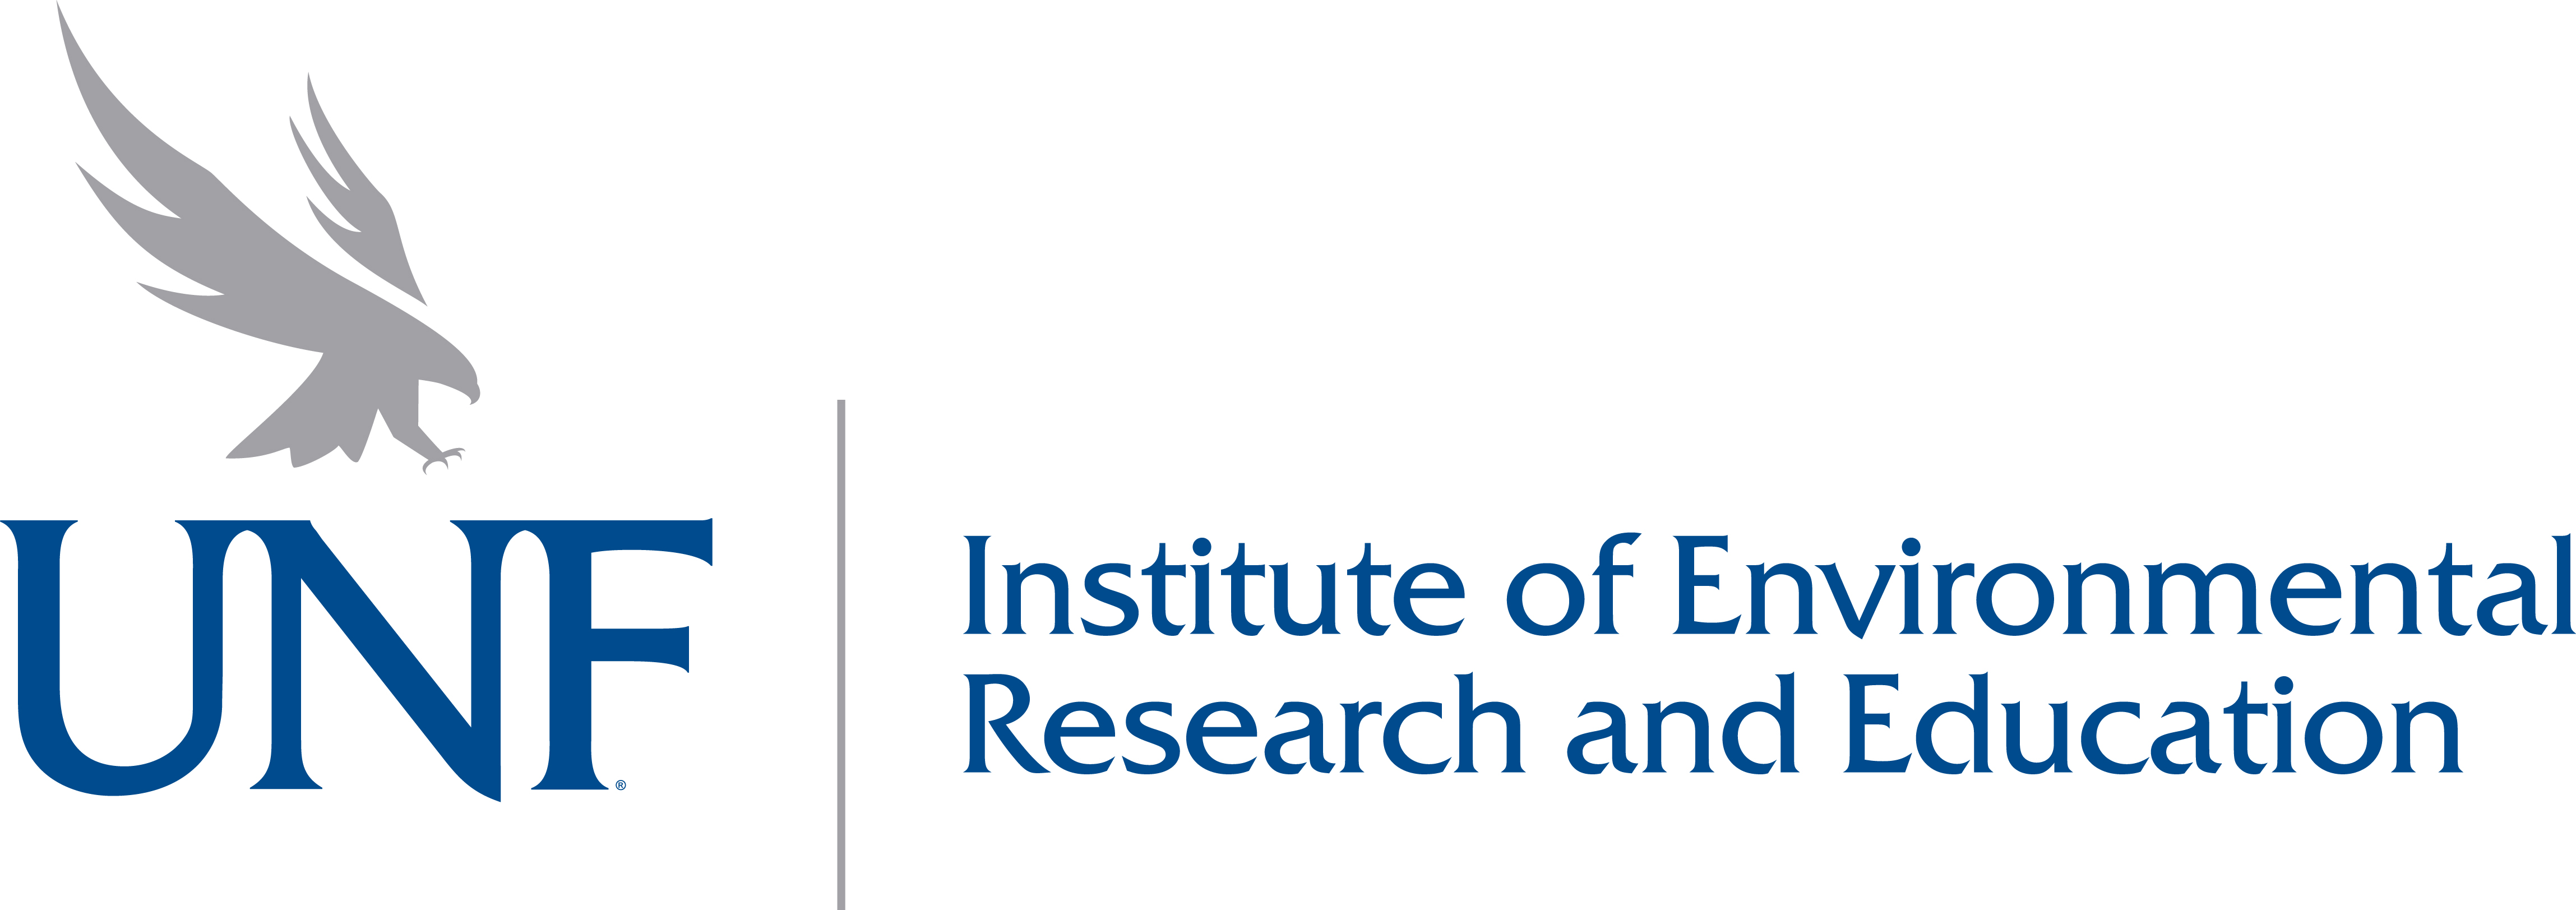 Institute of Environmental Research and Education (IERE)